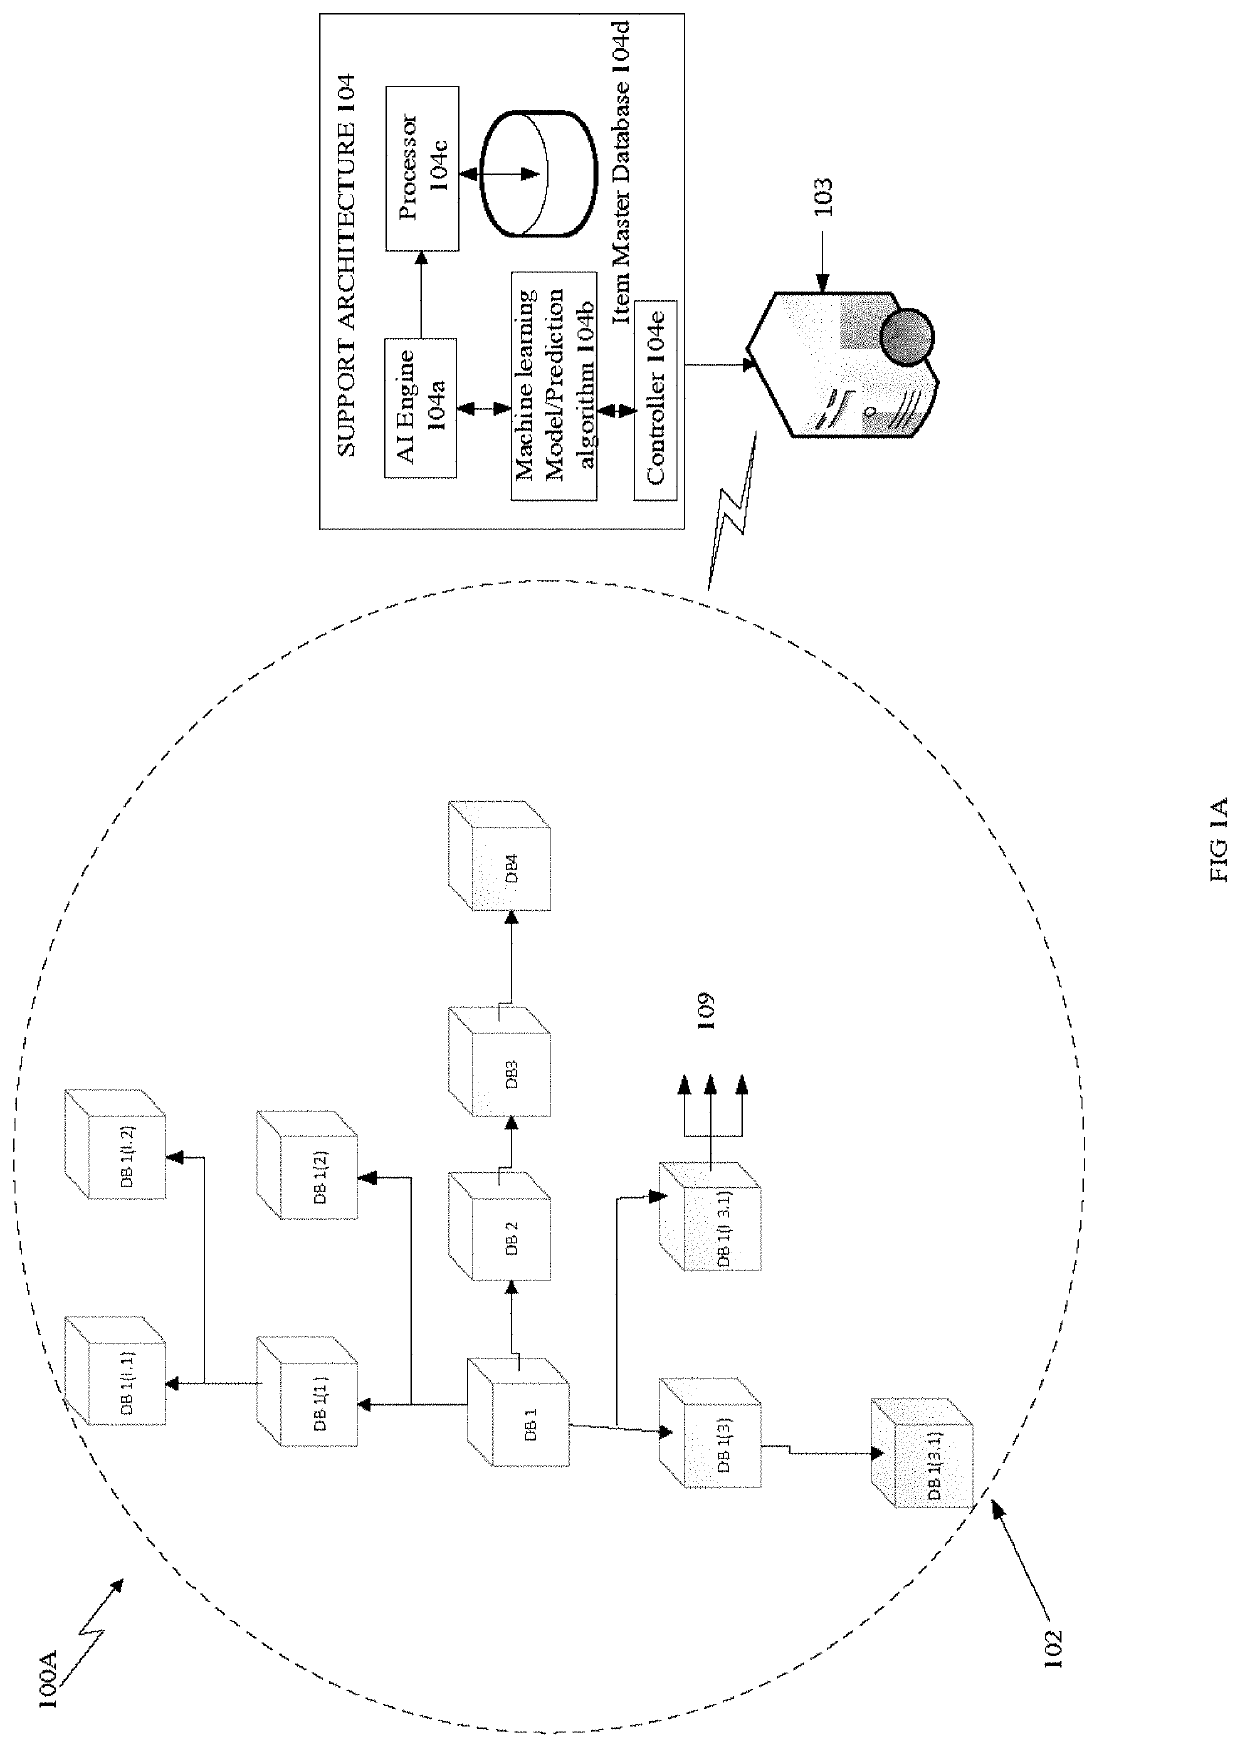 Supply chain management system and a method of operating the same